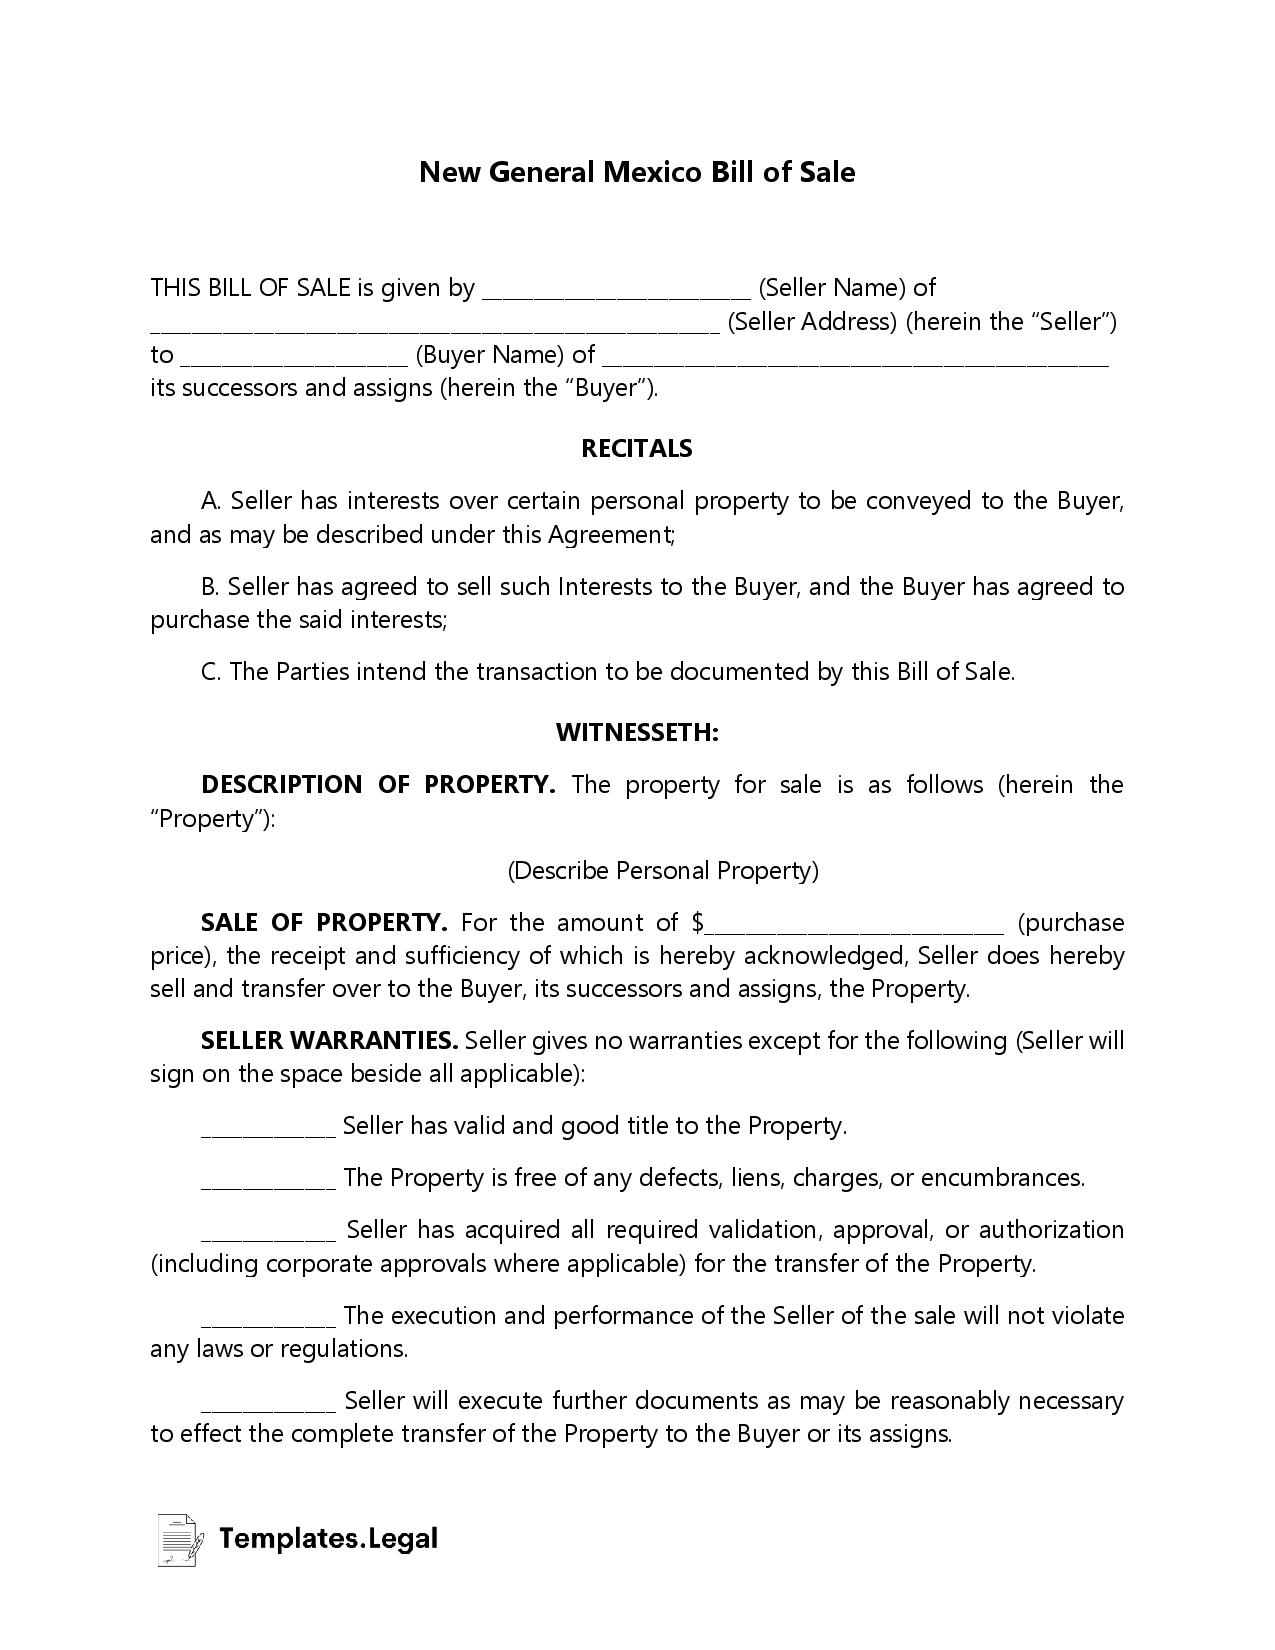 New Mexico General Bill of Sale - Templates.Legal